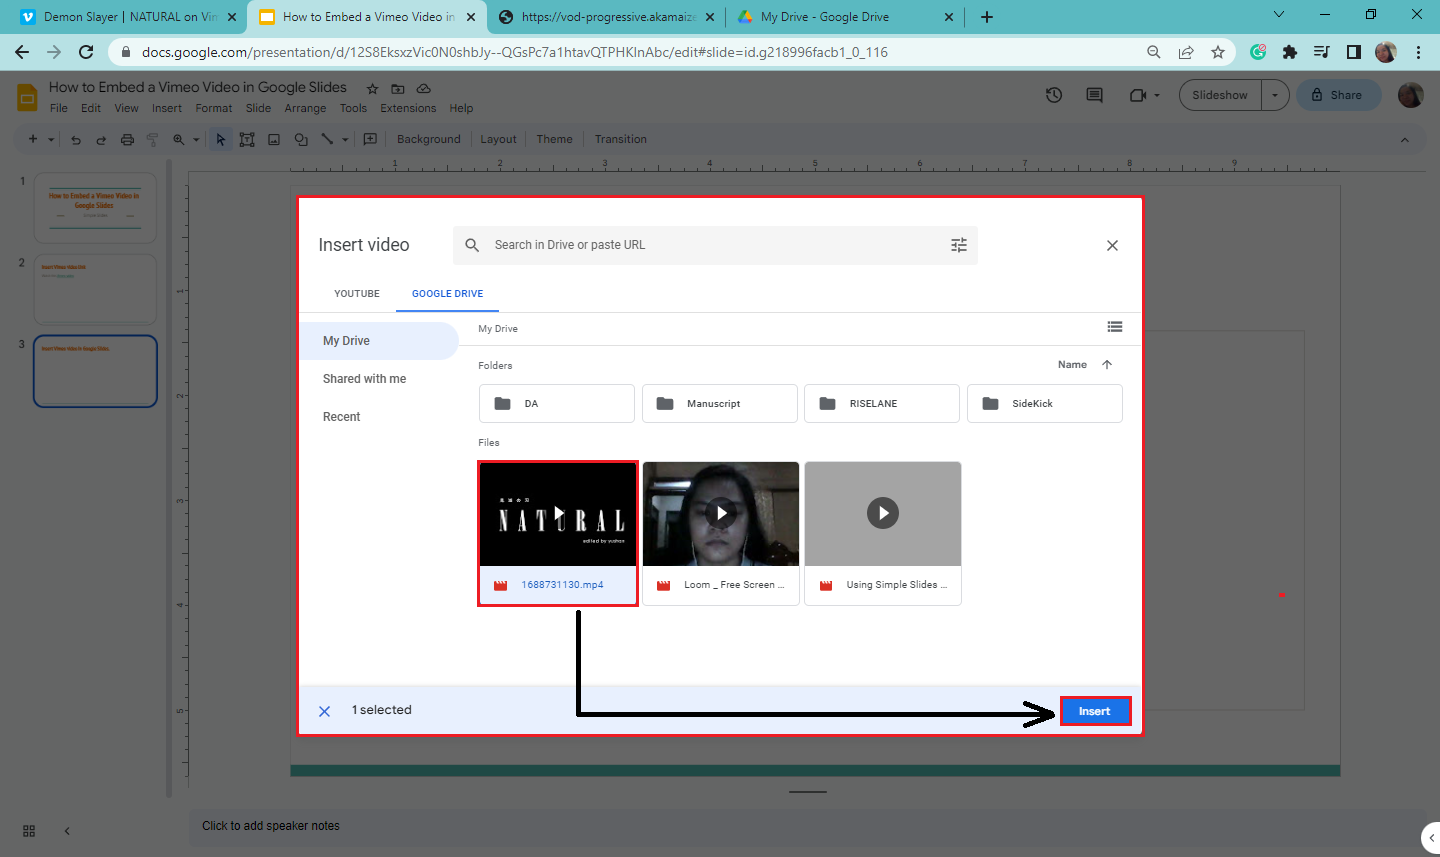 Select Google Drive tab from the "Insert video" window and click the video. Then click Insert.